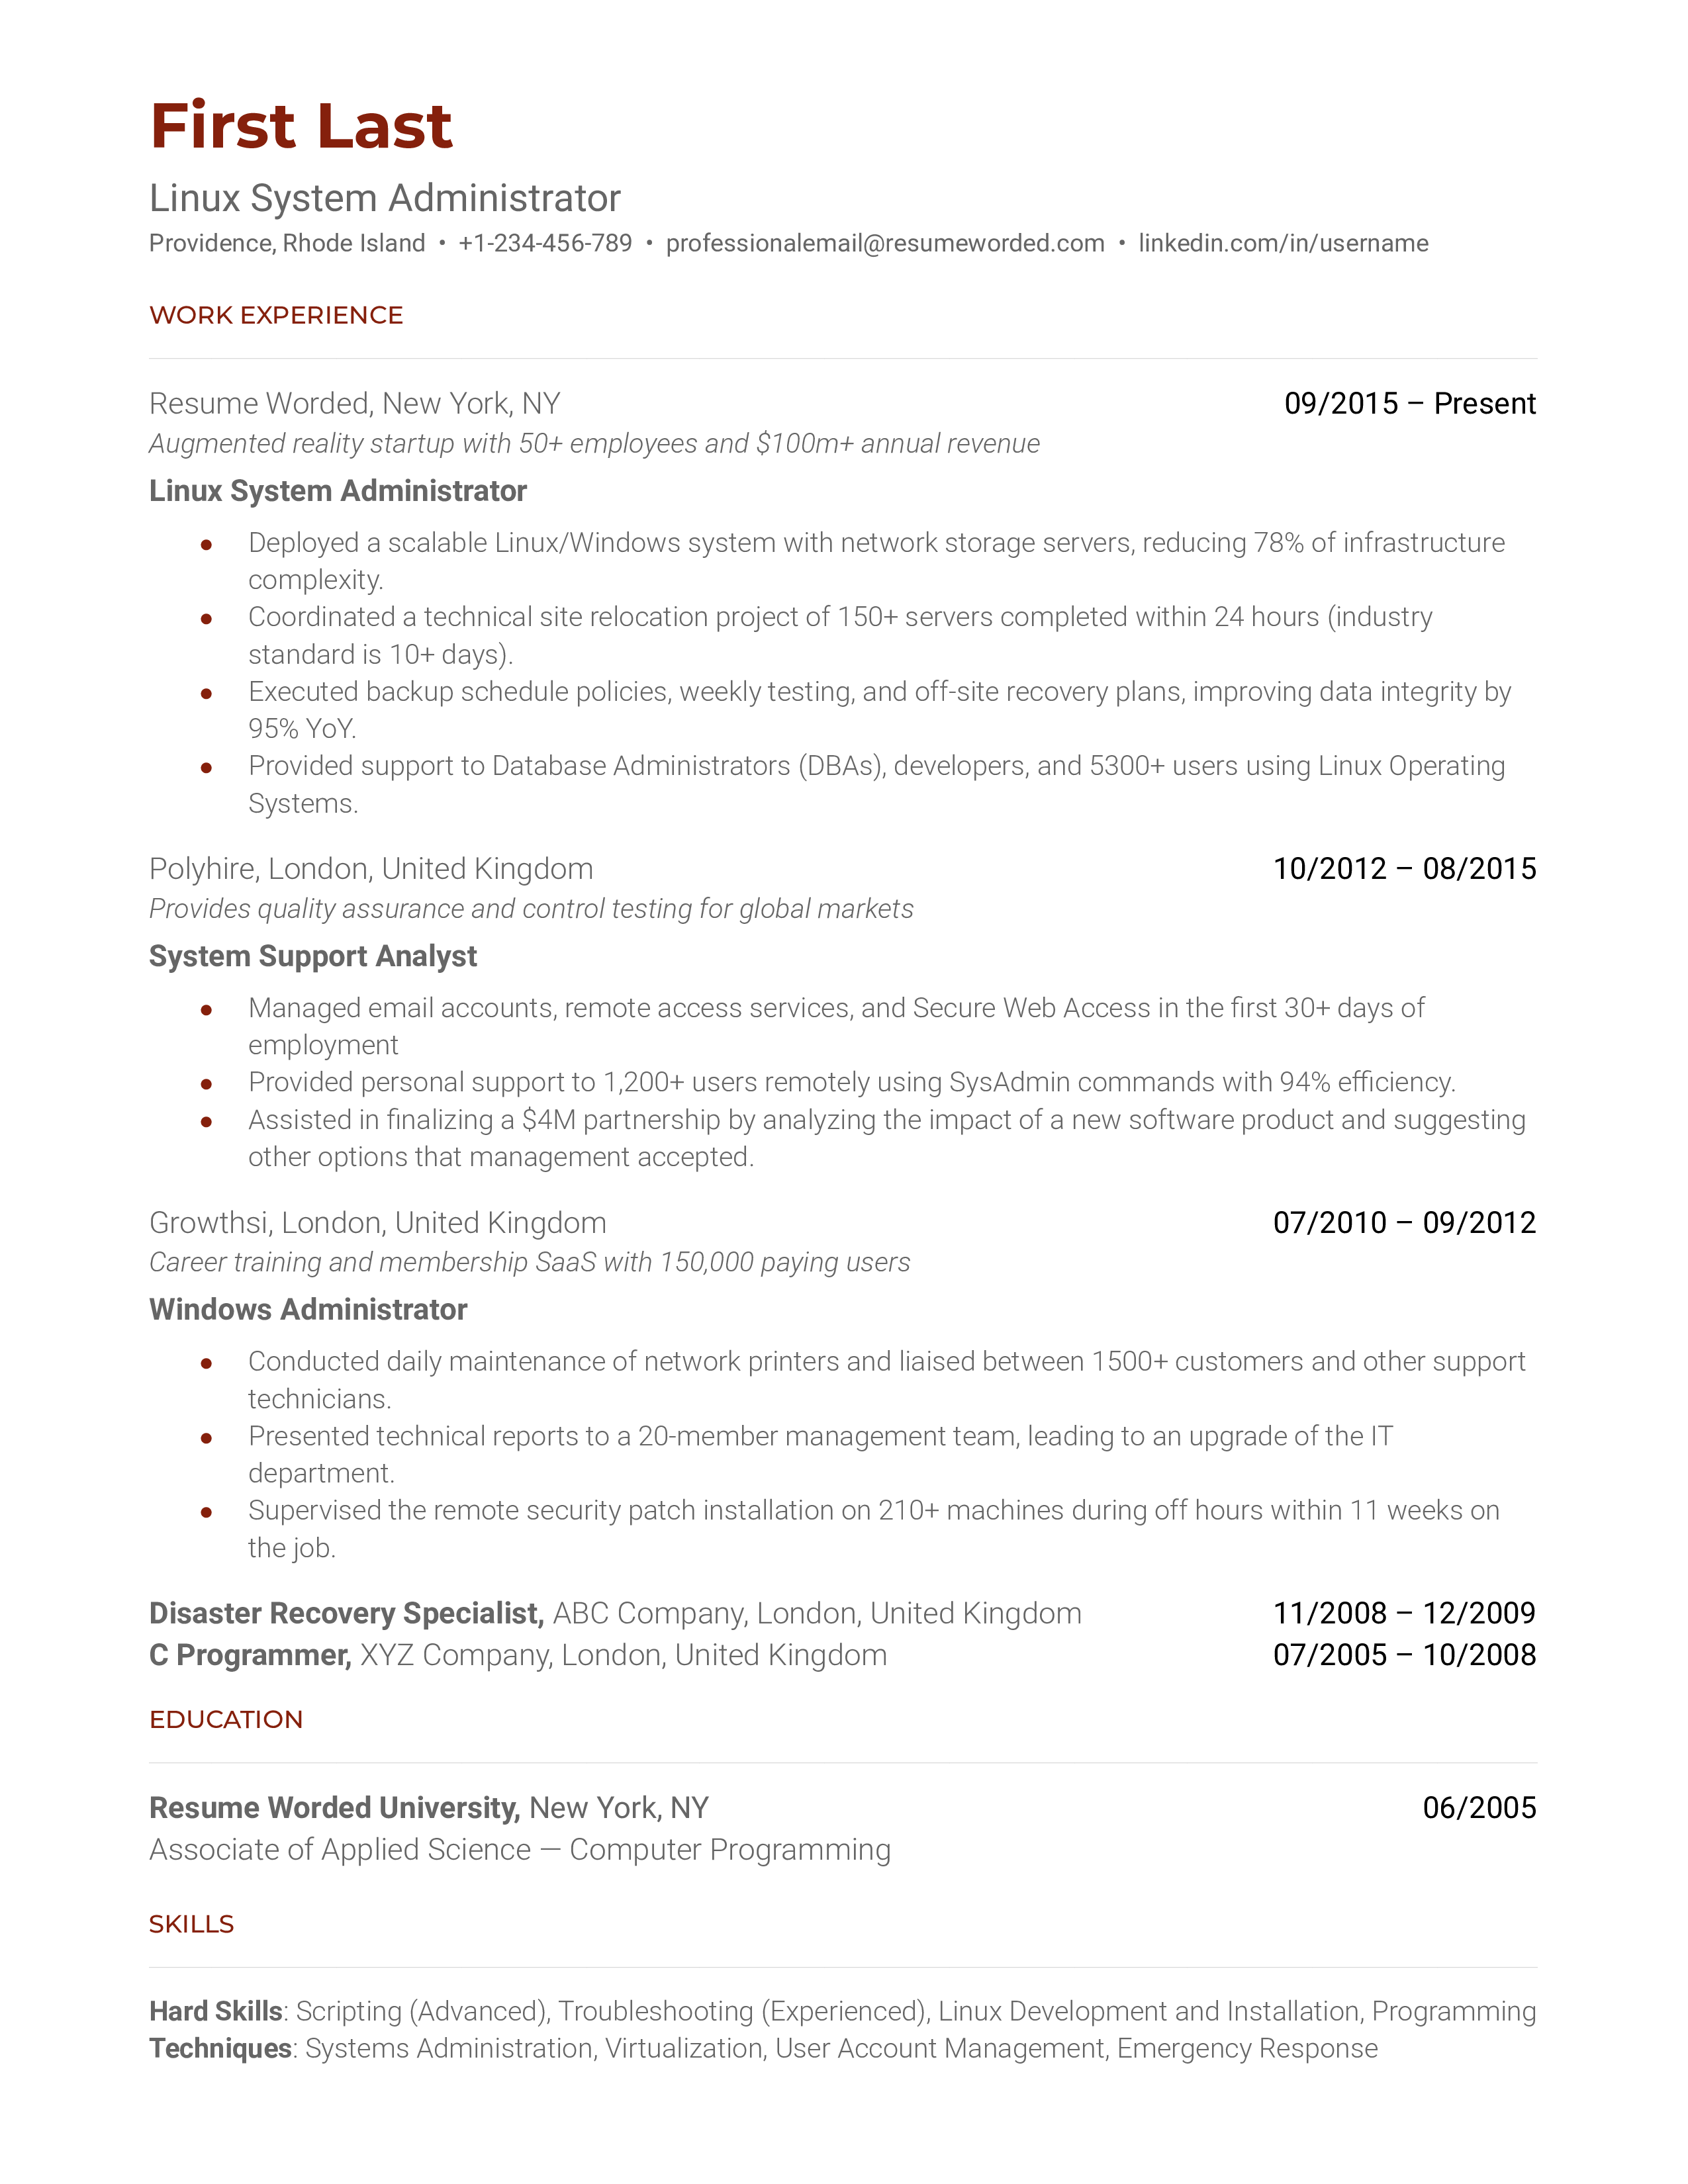 Linux System Administrator resume highlighting tools, distributions, and certifications.